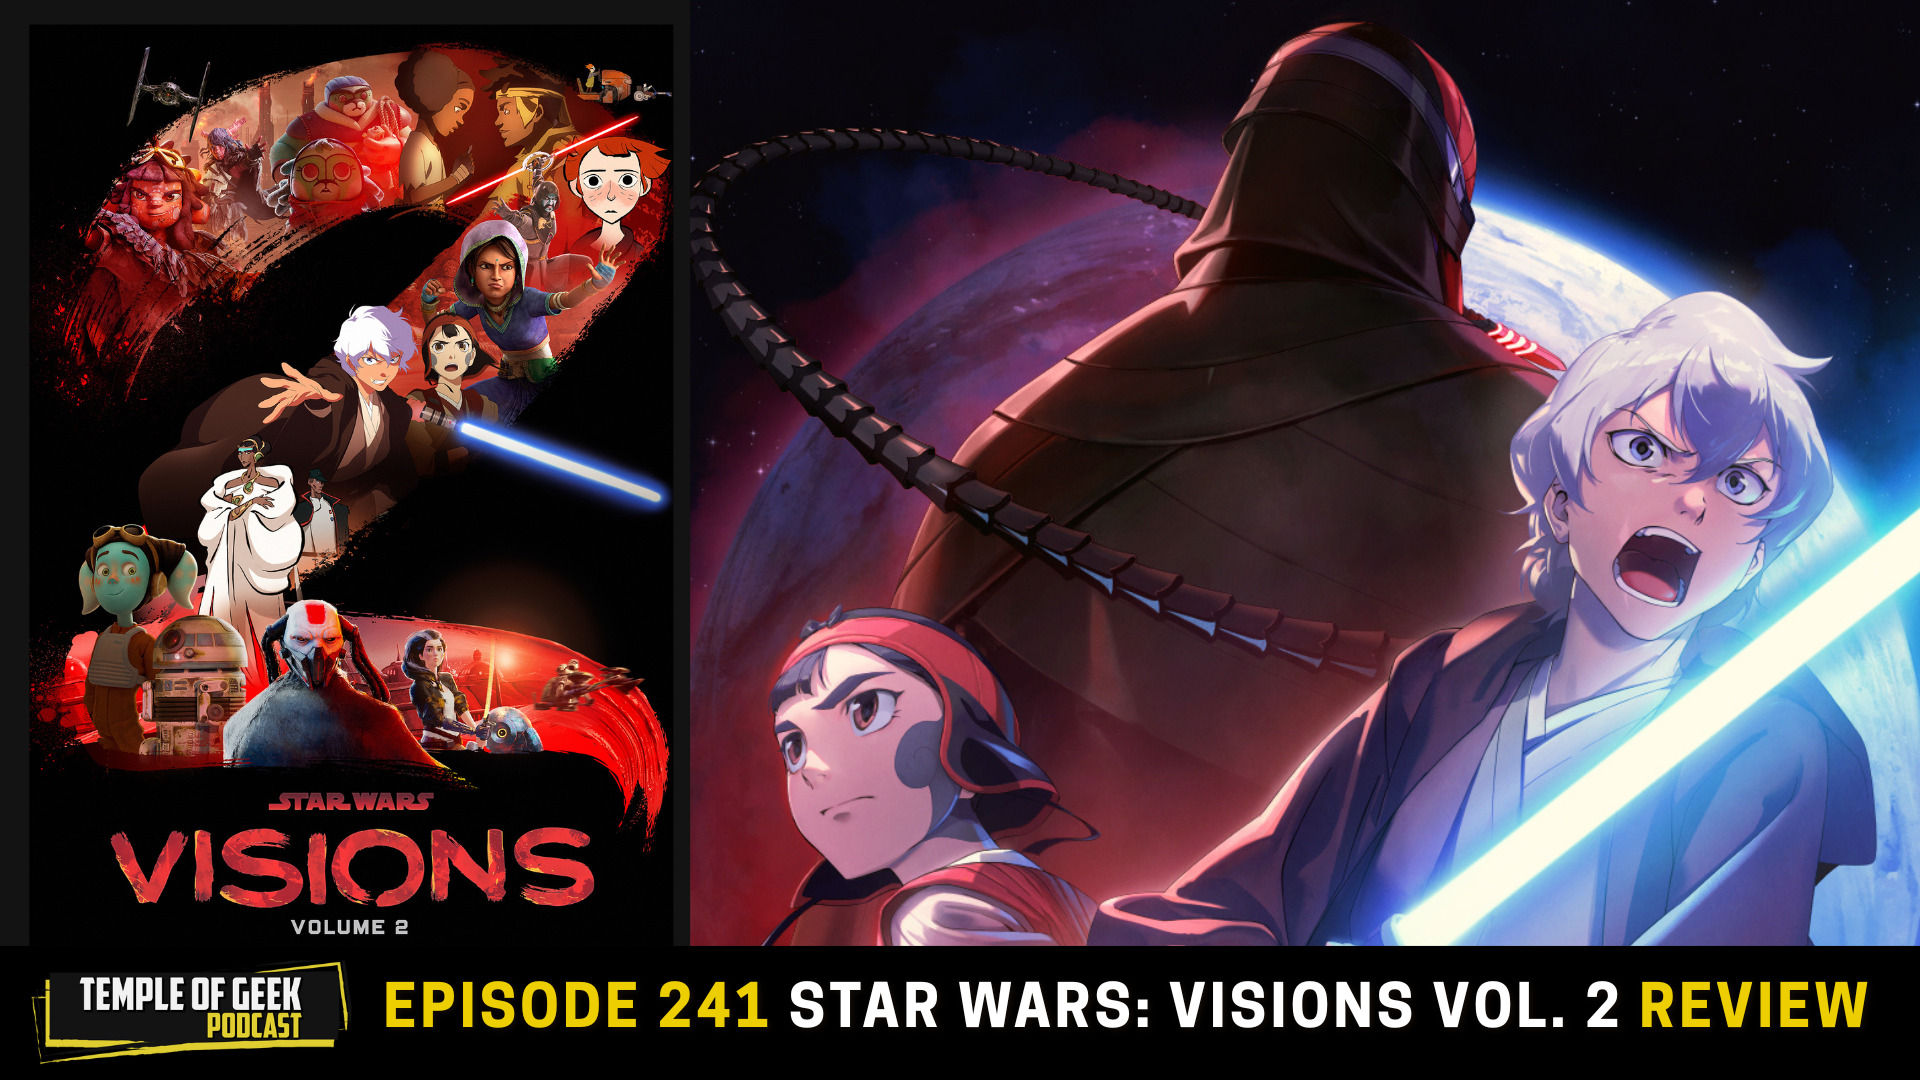 Star Wars: Visions season 2 episodes rated in the best way